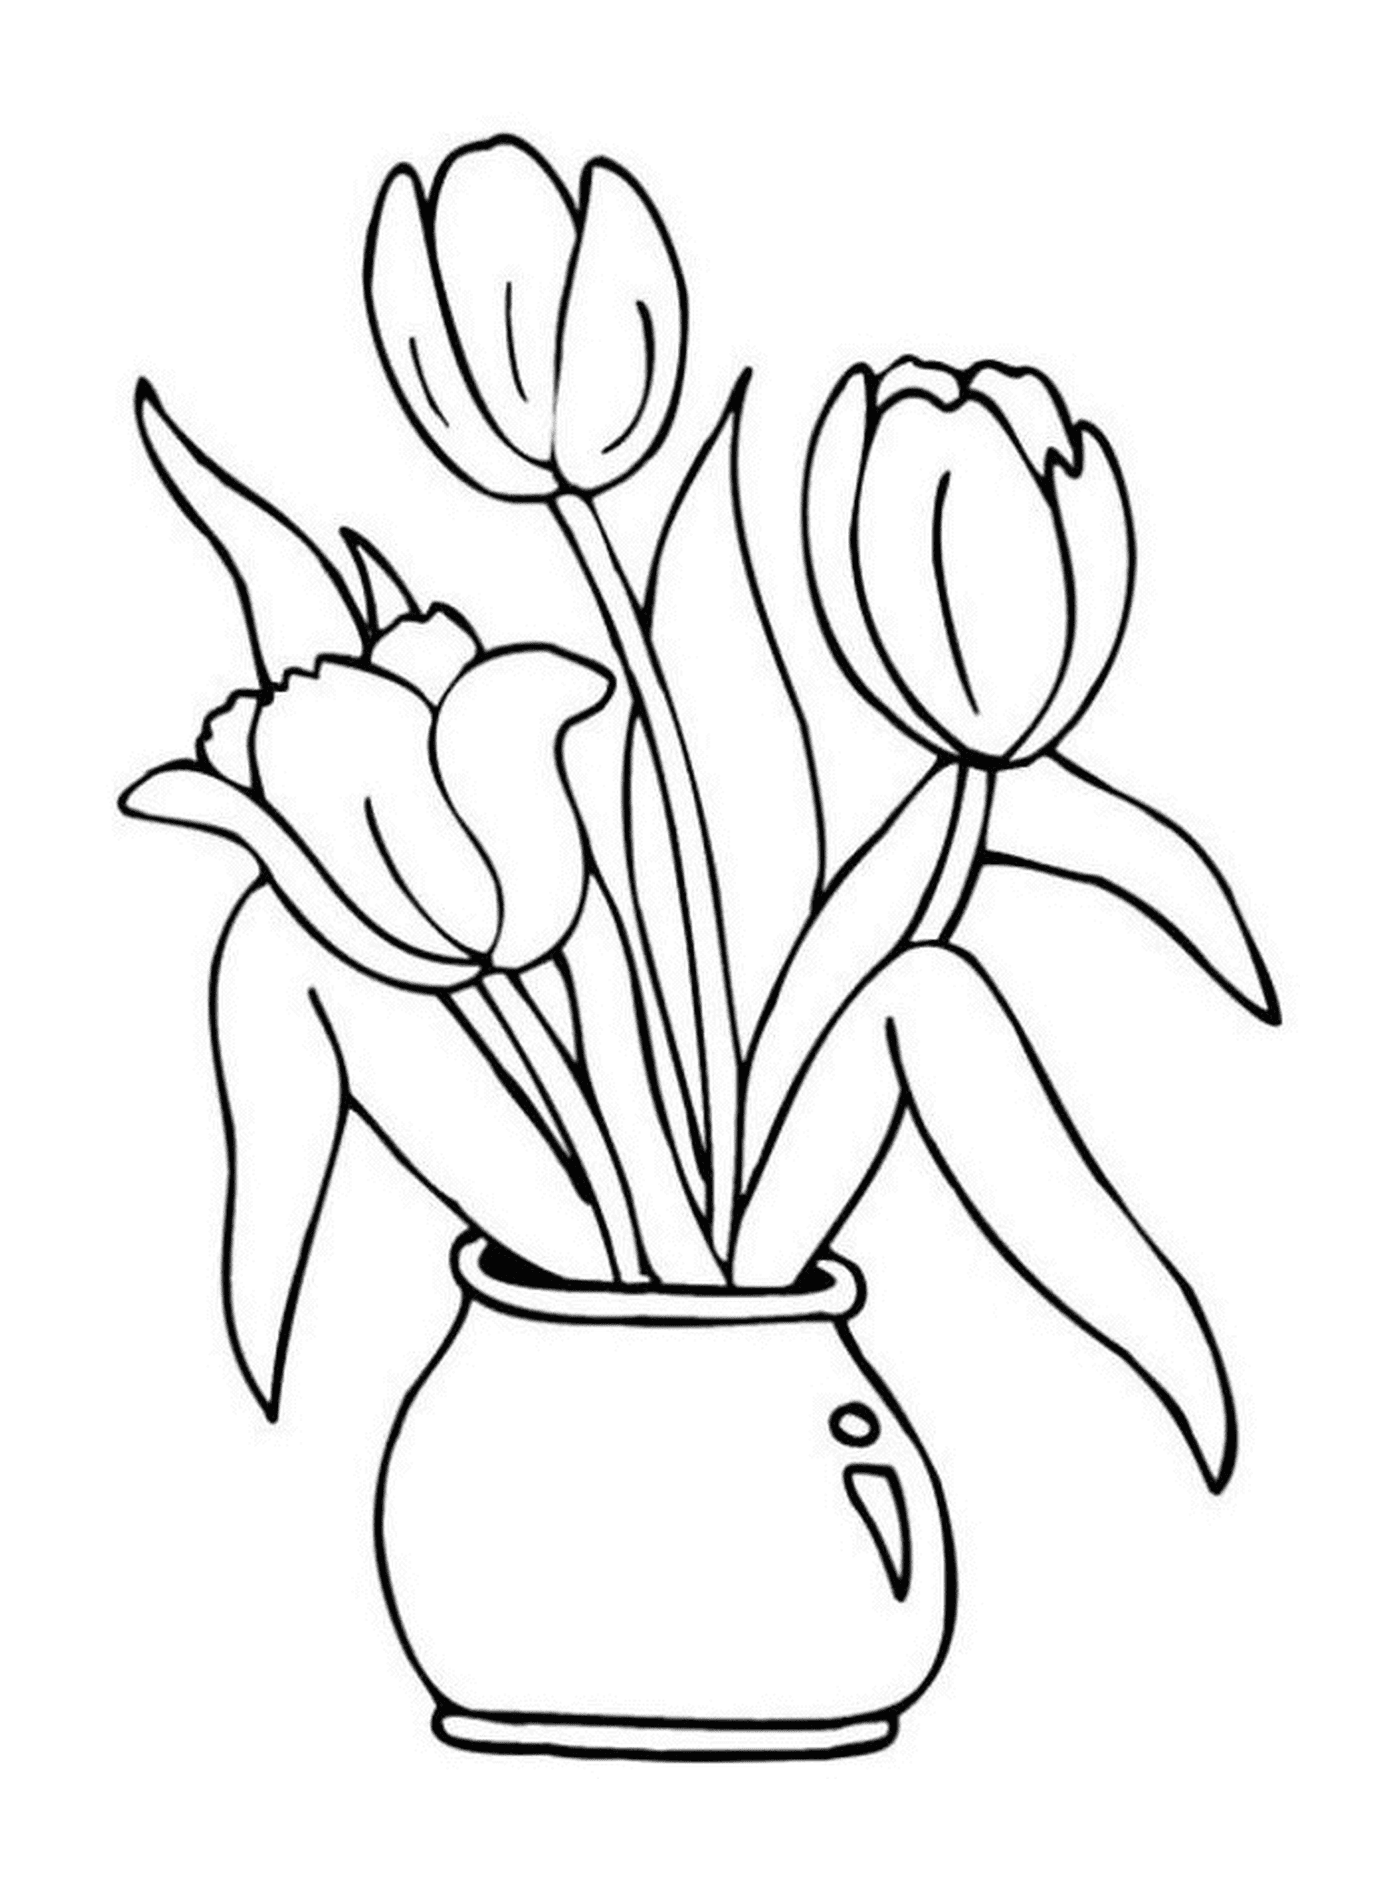  Three colored tulips in a vase 